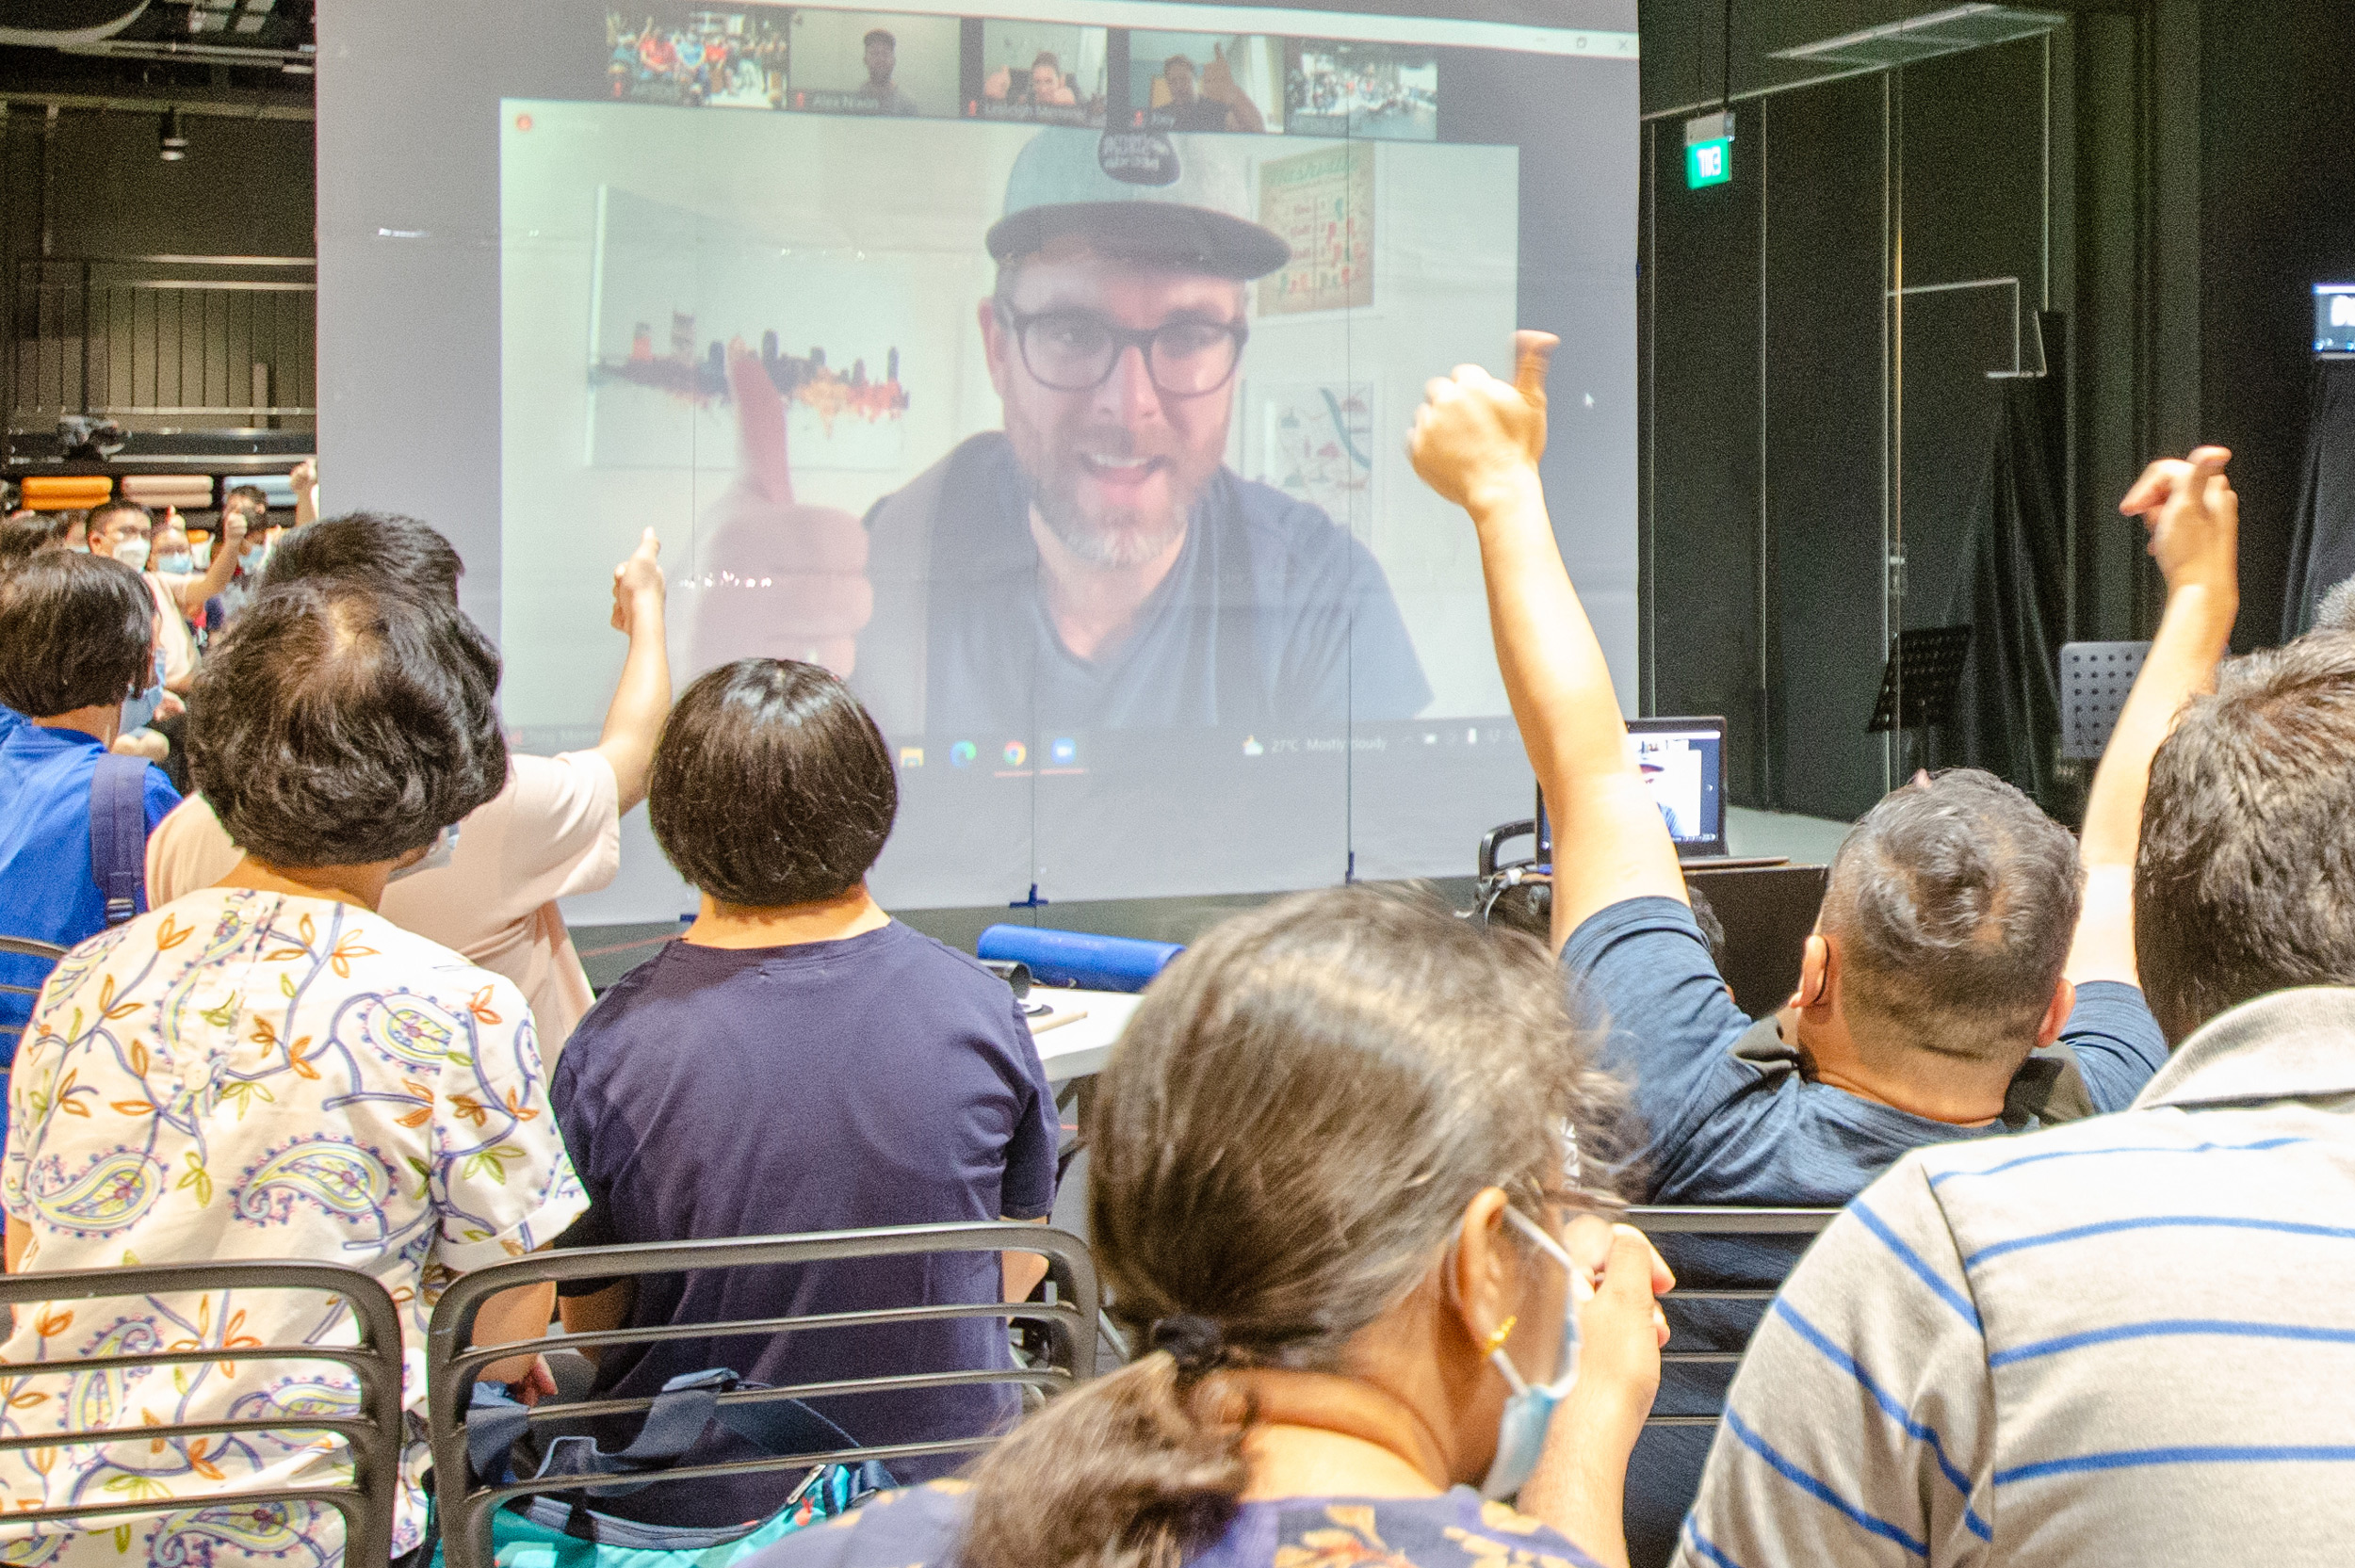 This image features Tony Memmel projected on a screen. He is making the thumbs-up sign and the participants are responding with raising their own hands in the hair with the thumbs-up sign.